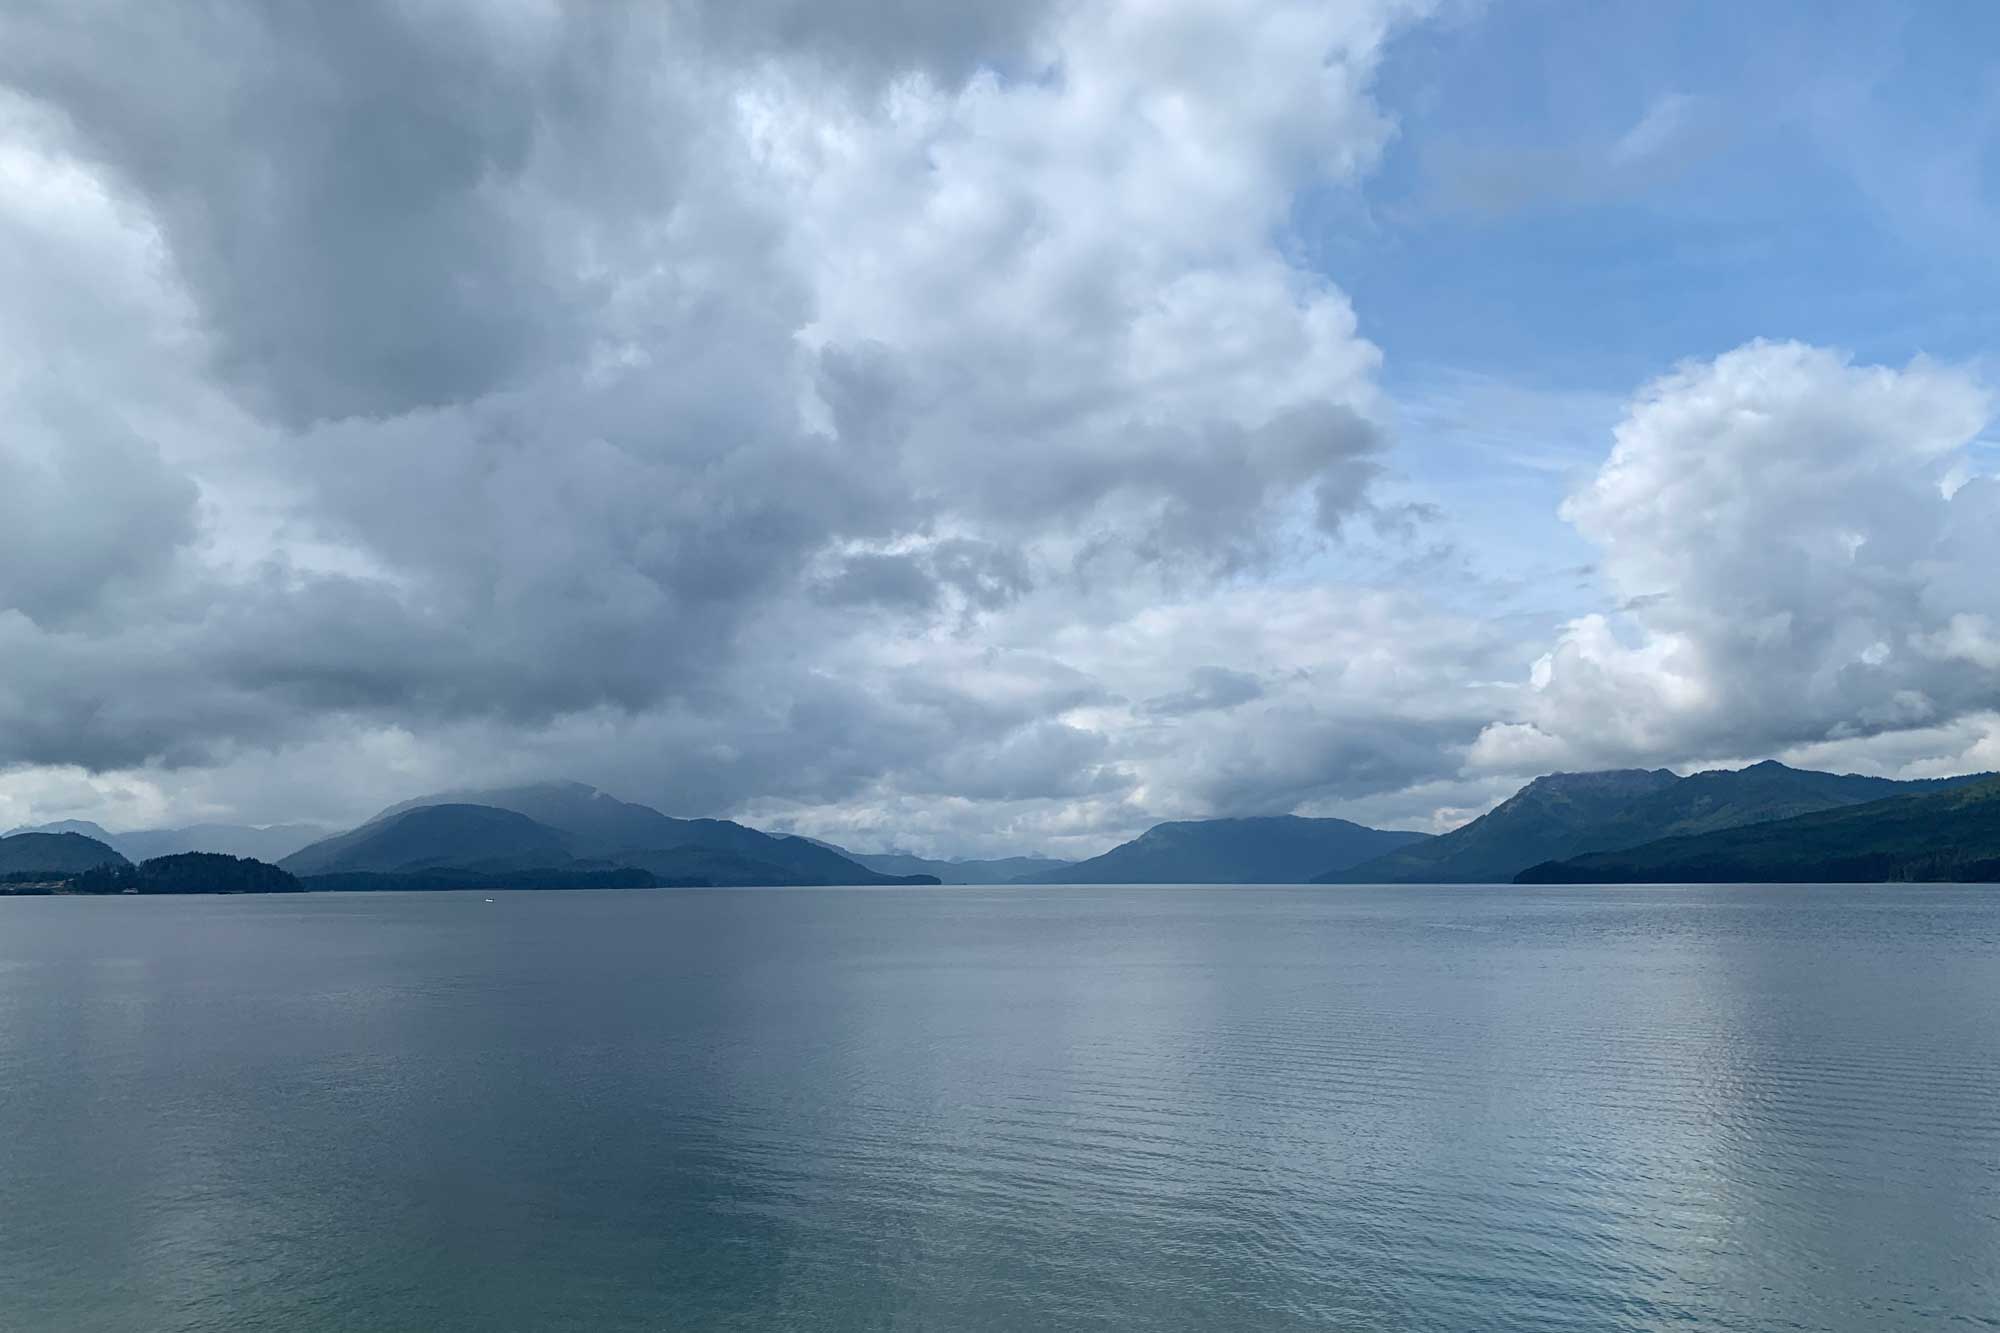 Photograph of a bay with mountains in the distance at Hoonah-Angoon, Alaska.